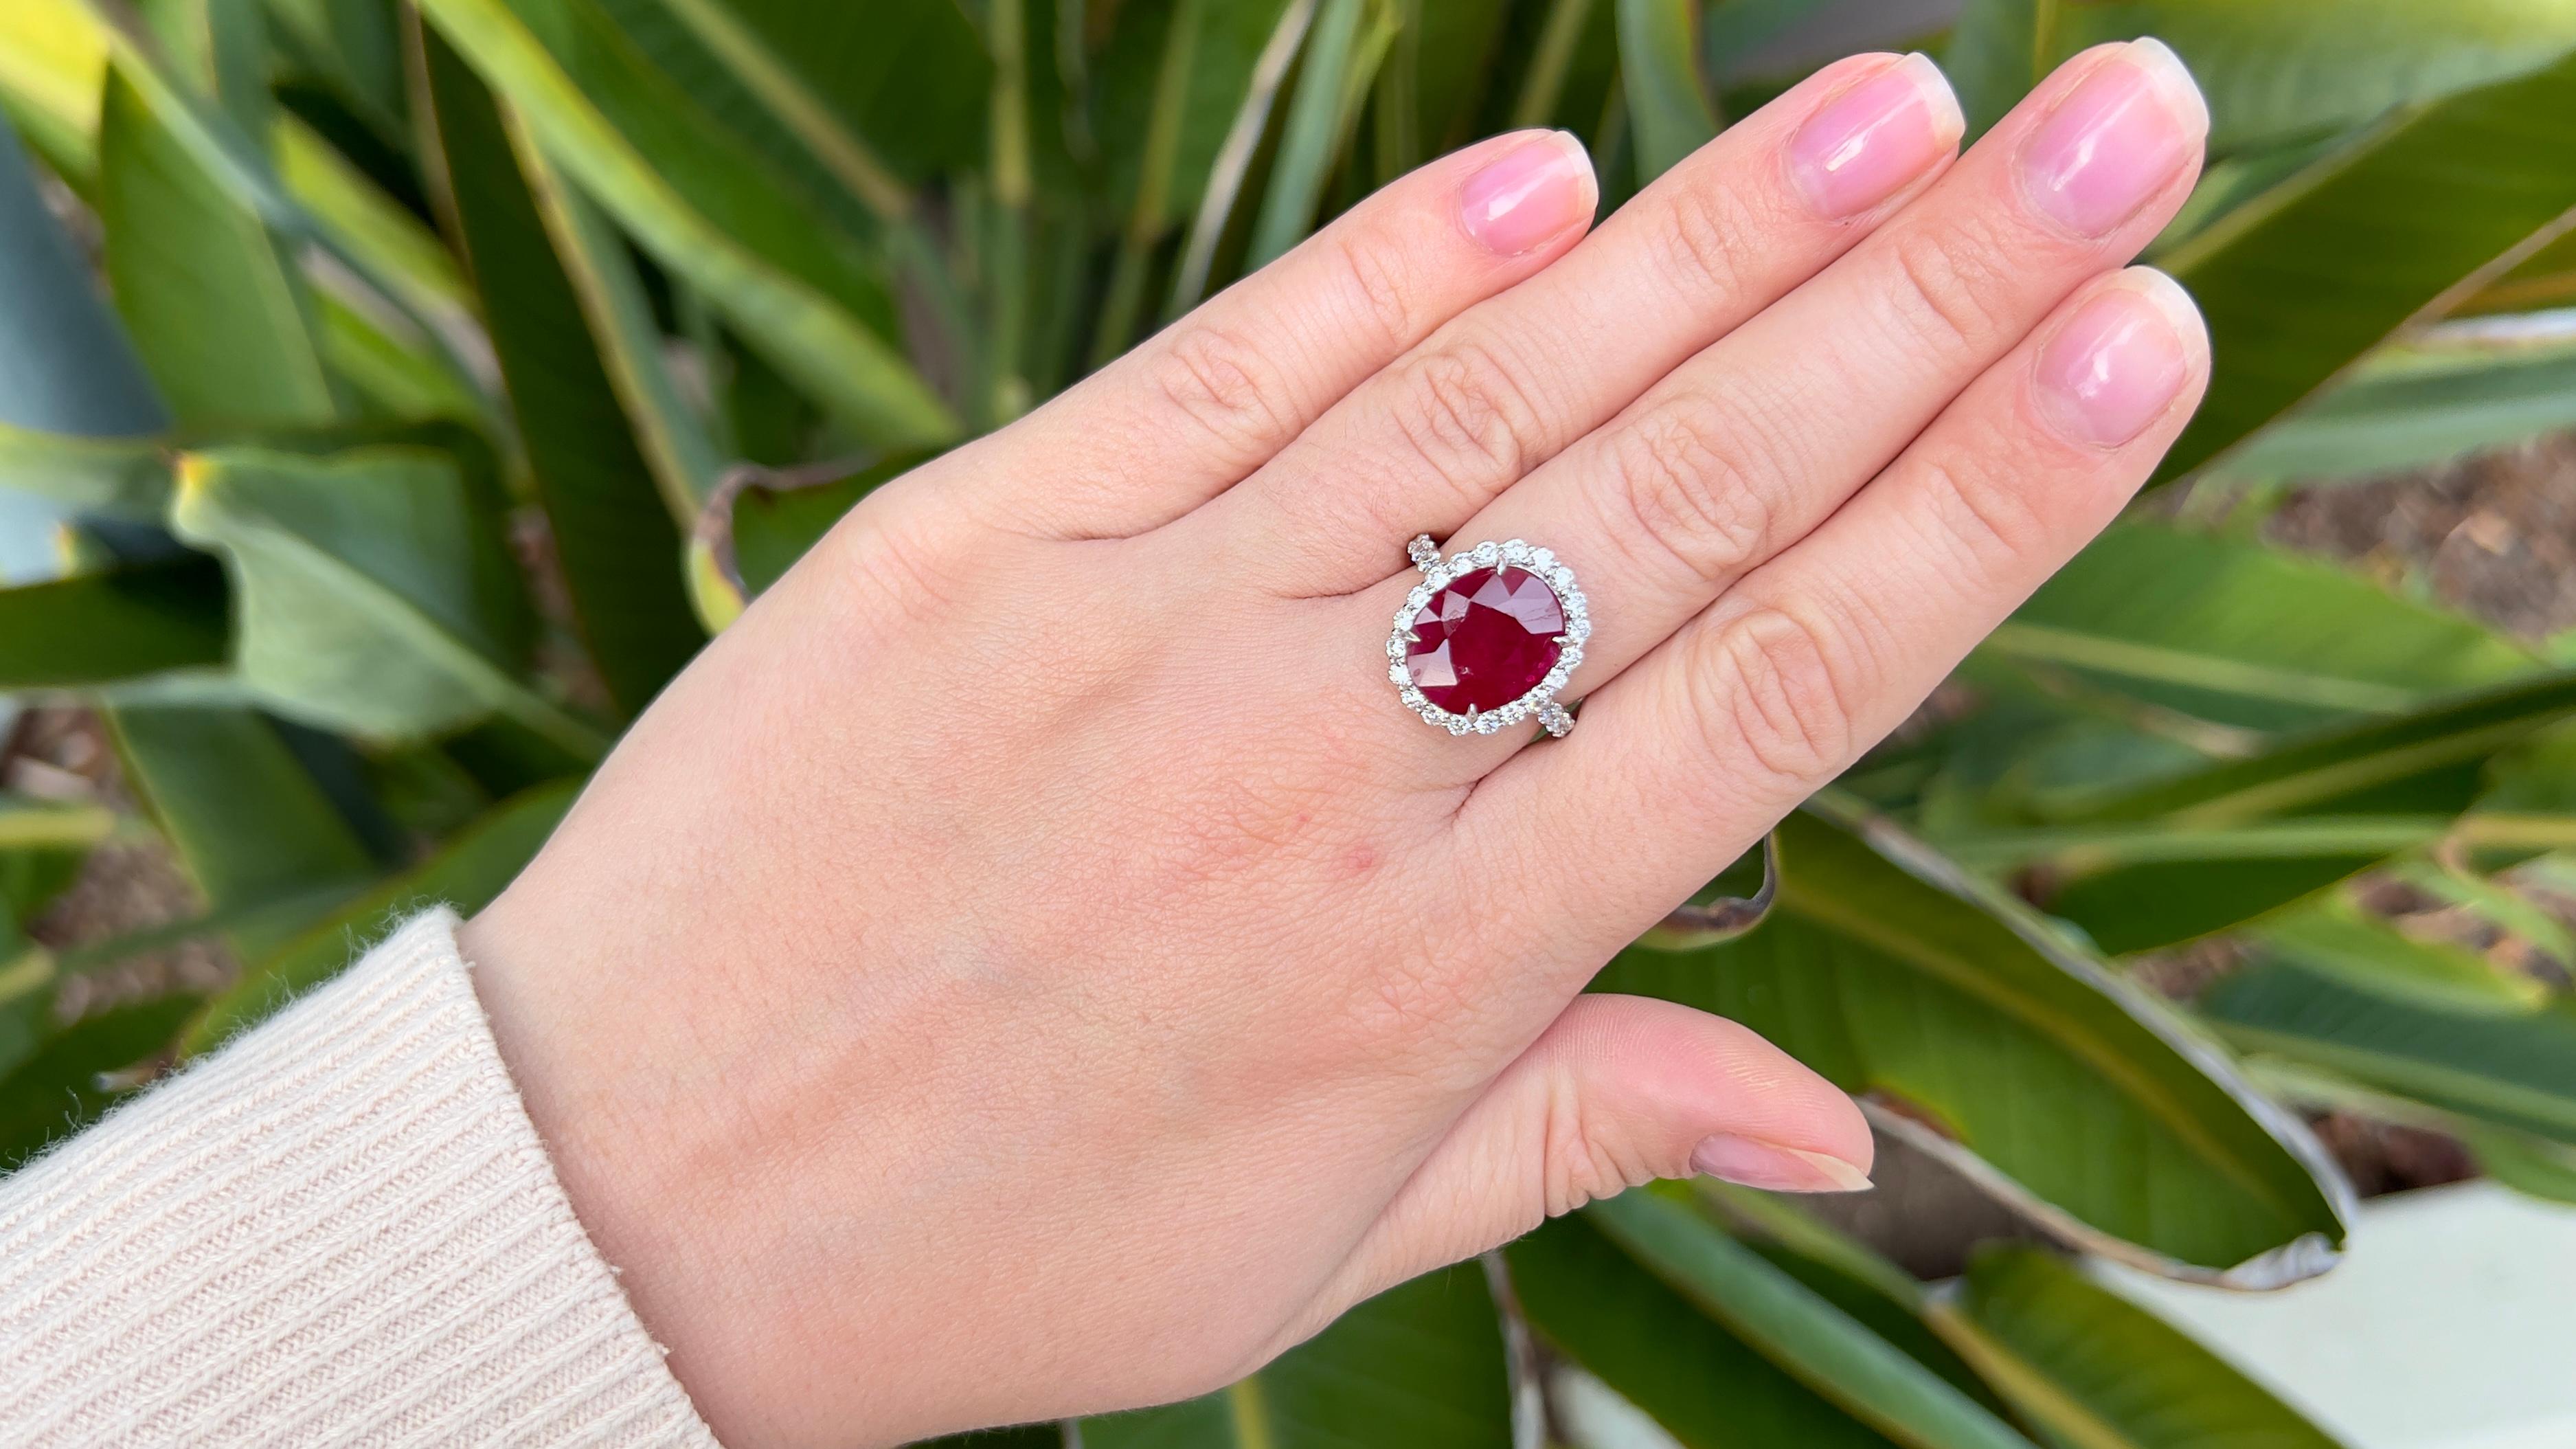 Ruby = 6.50 Carat 
Cut: Oval
Diamonds = 0.80 Carats
( Color: F, Clarity: VS )
Metal: 18K Gold
Ring Size: 7* US
*It can be resized complimentary